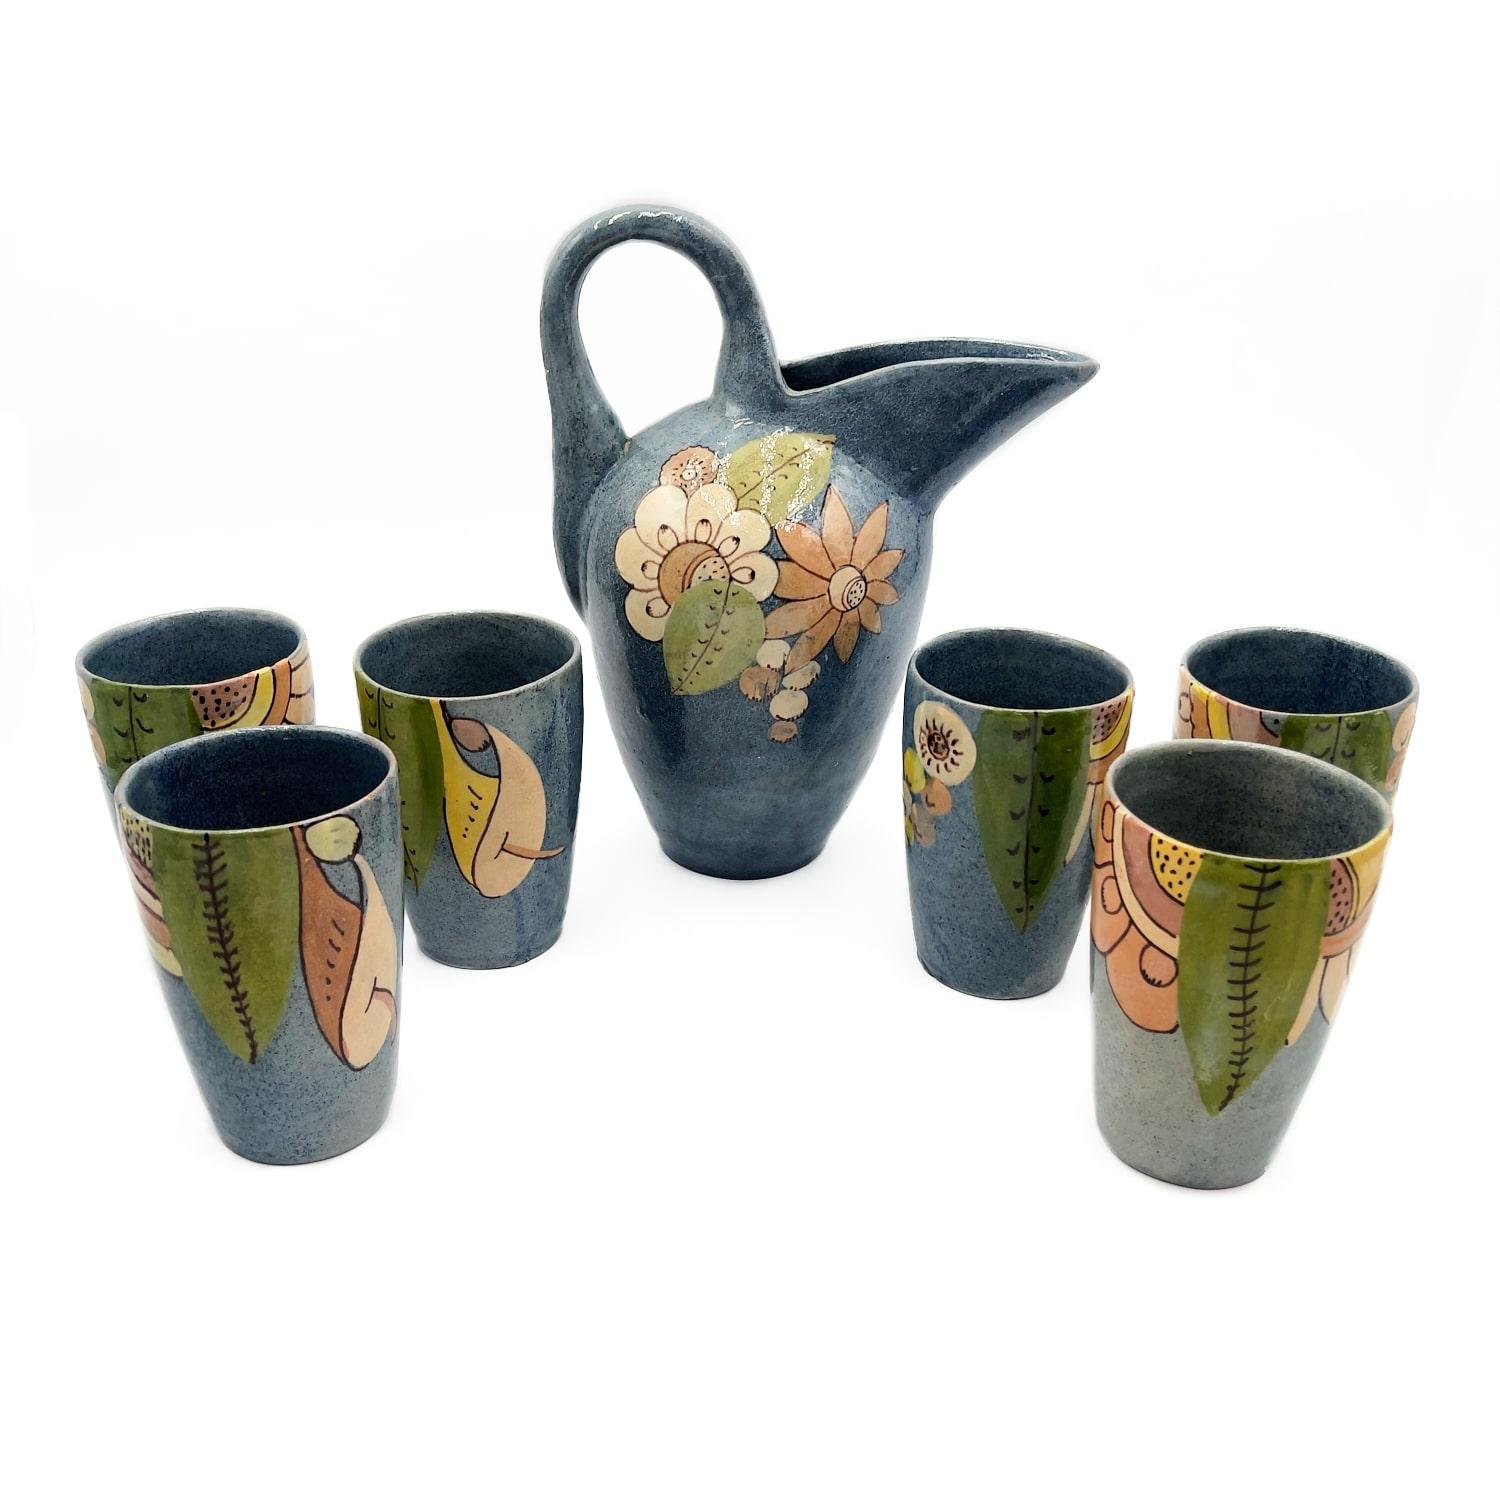 Beautifully glazed 1930's - 40's set of Mexican Tlaquepaque folk art pottery serving set. Includes a highly stylized shaped pitcher + 6 matching tumblers with a soft speckled blue glaze base and accented with a rich pastel decorative flora